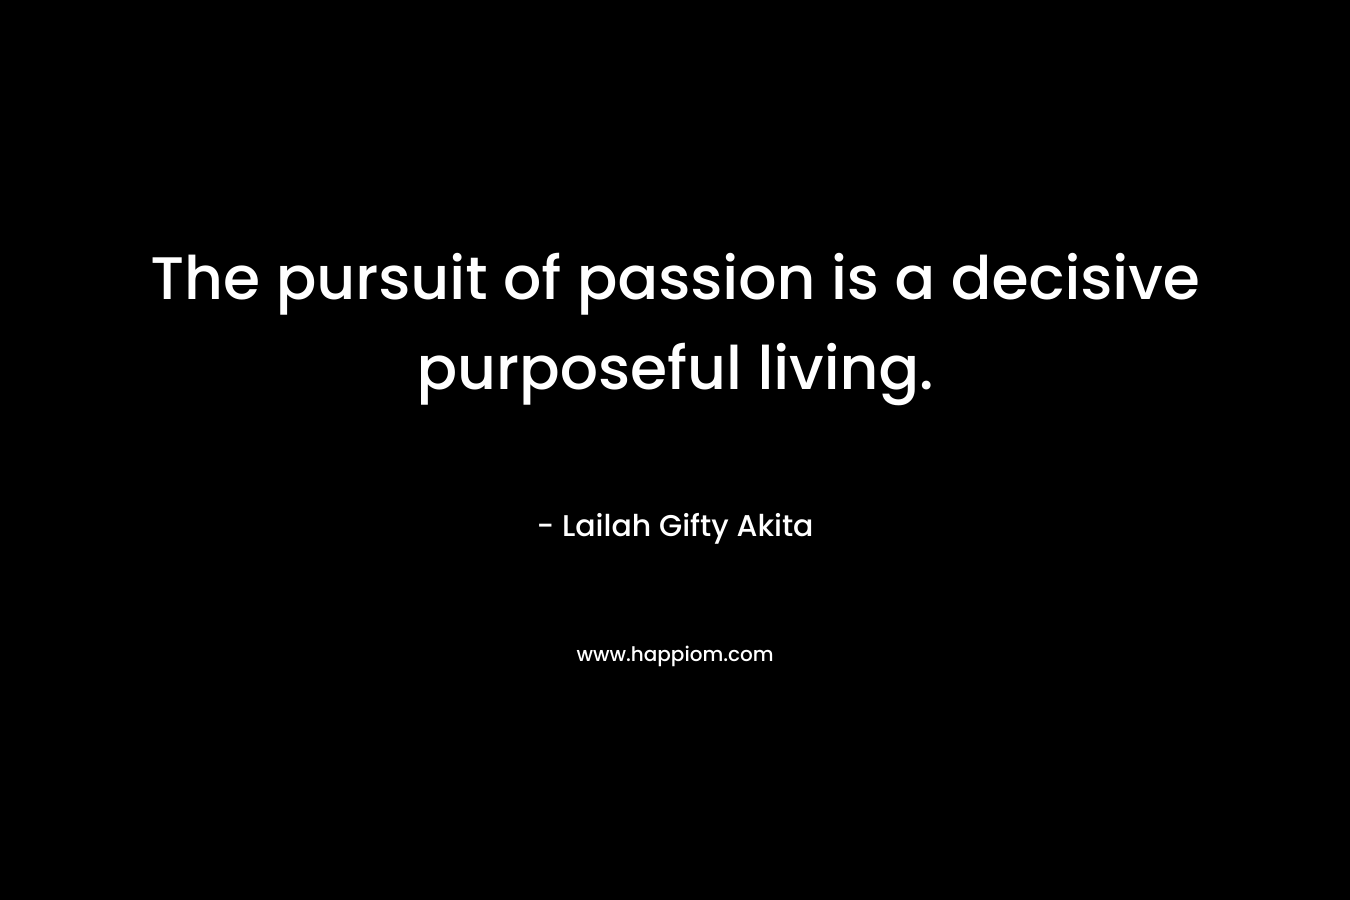 The pursuit of passion is a decisive purposeful living.